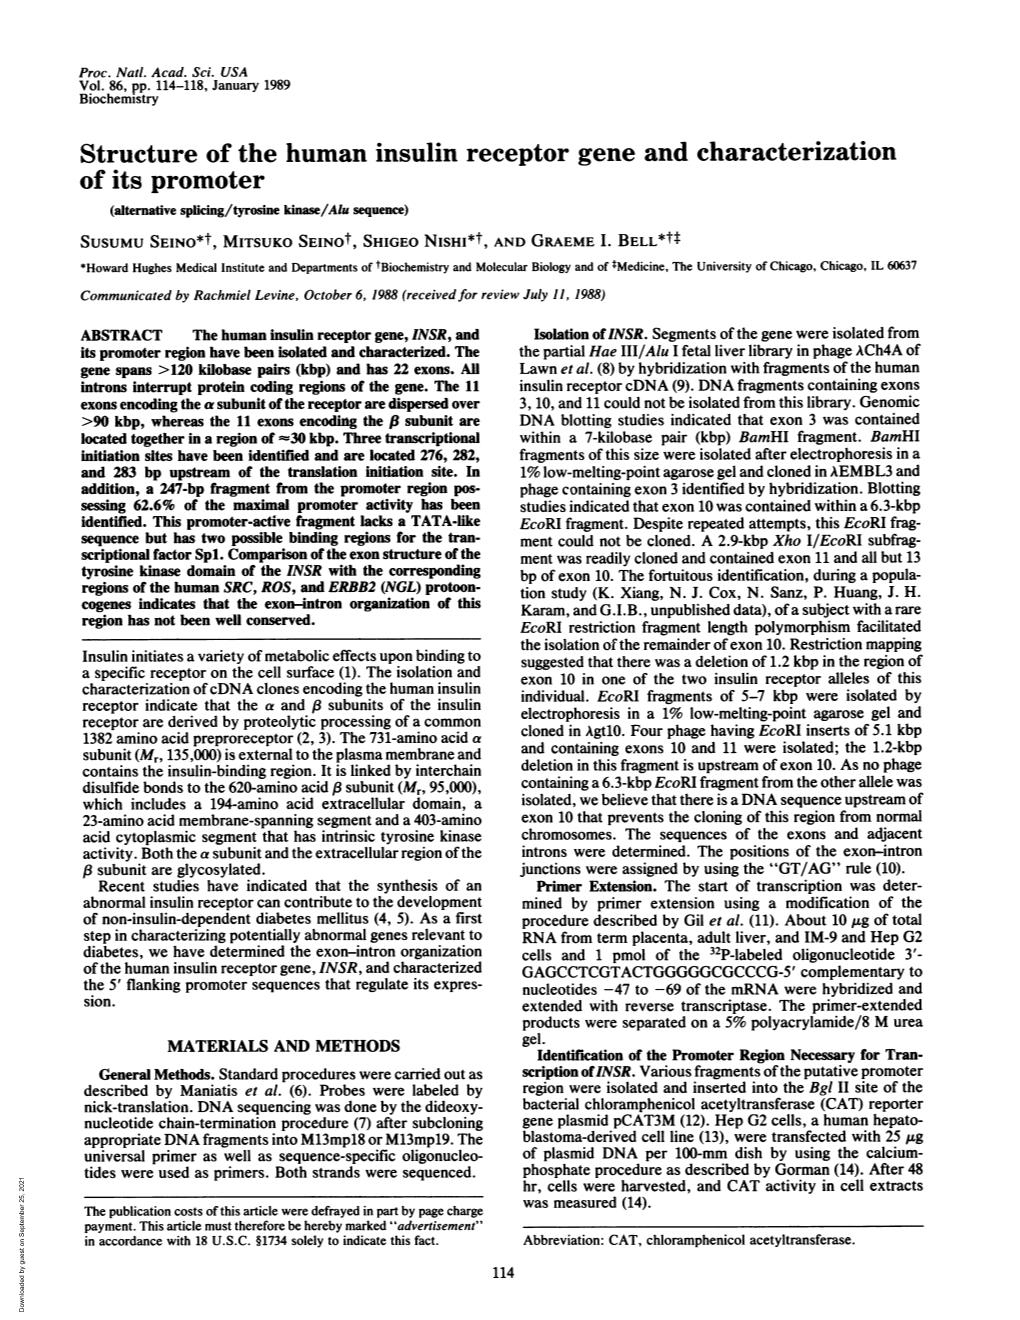 Structure of the Human Insulin Receptor Gene and Characterization